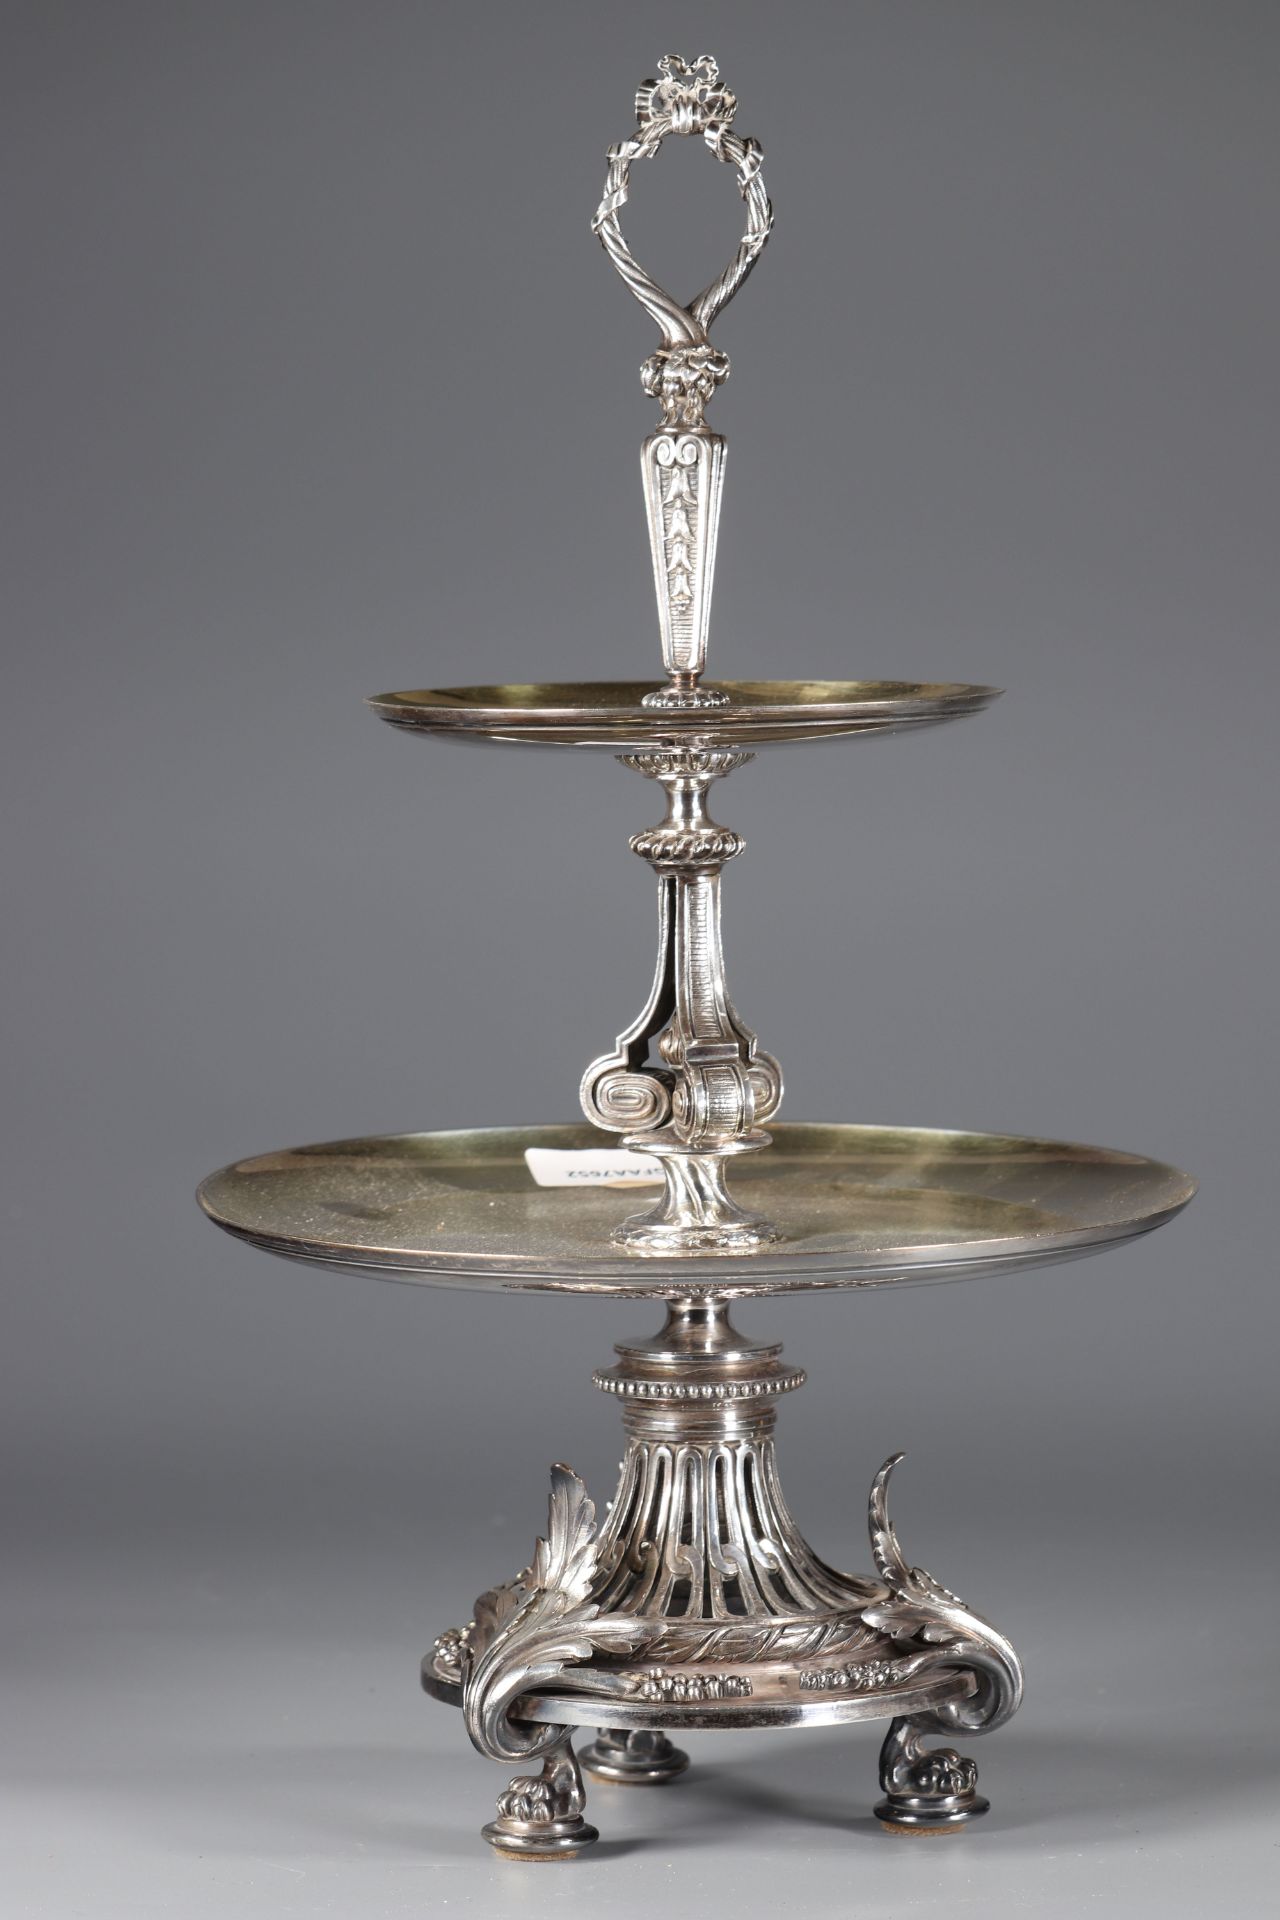 Christofle silver-plated centerpiece